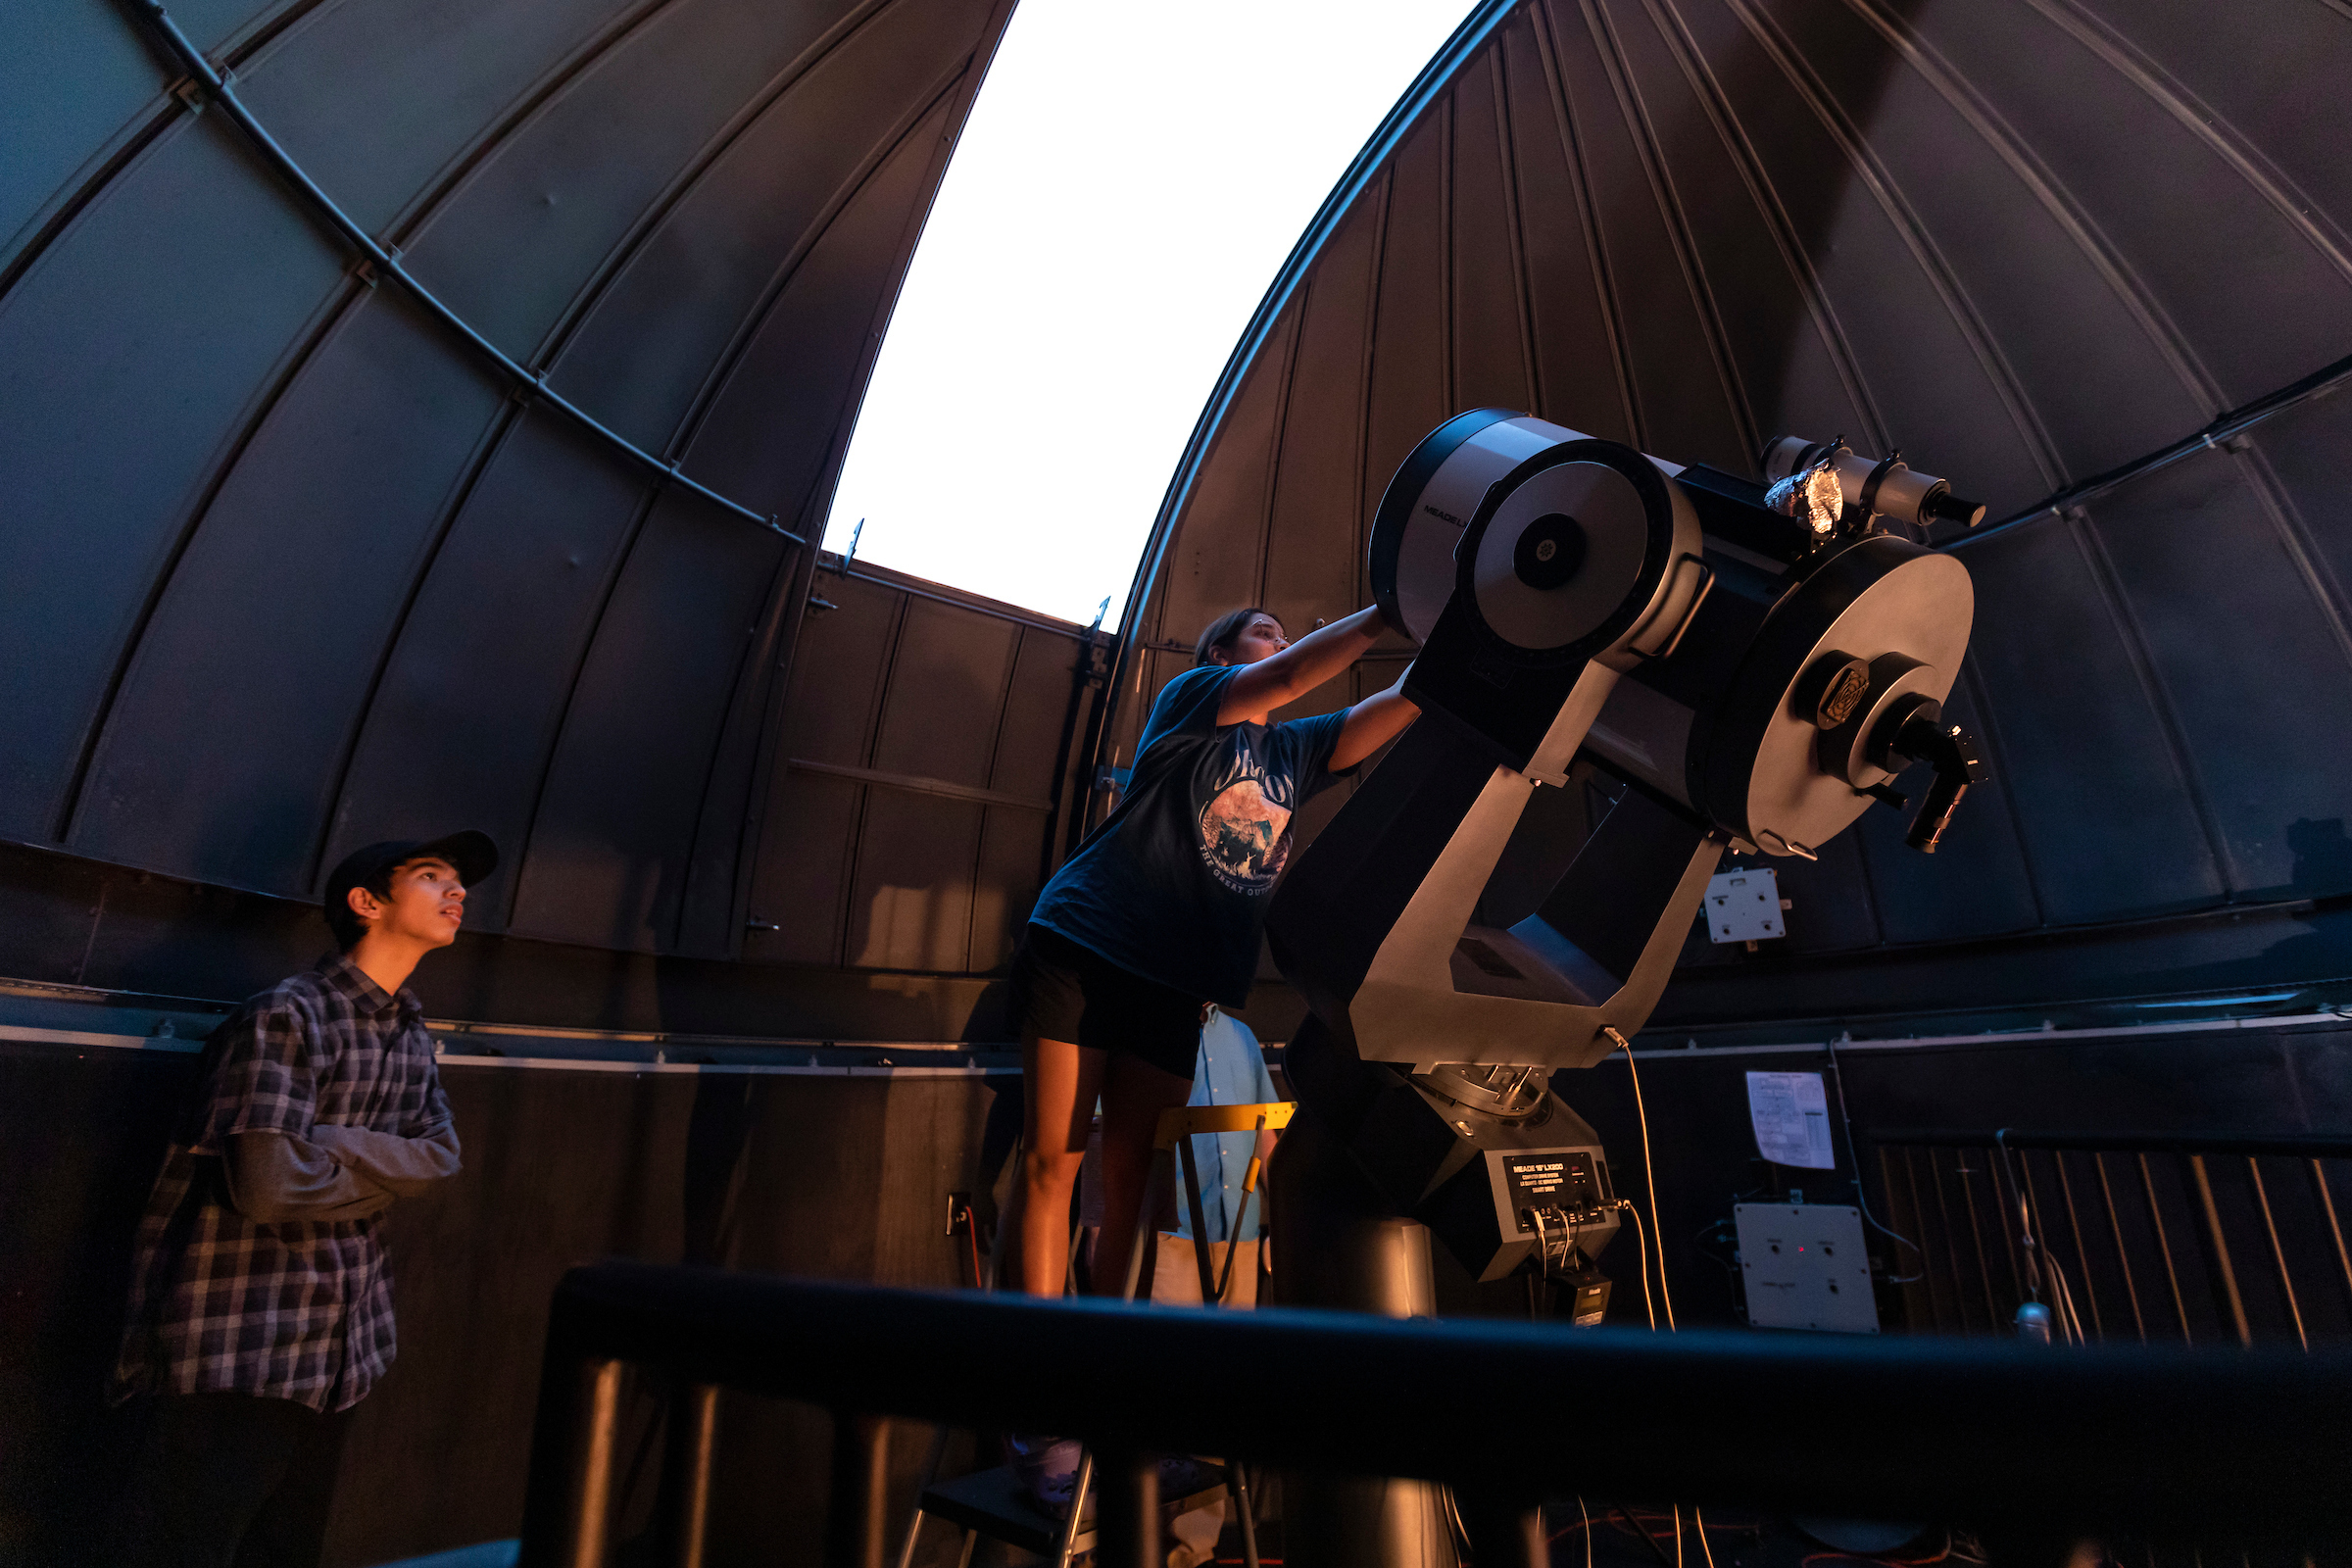 Student stand in front of large telescope. Another student watches with their arms folded.